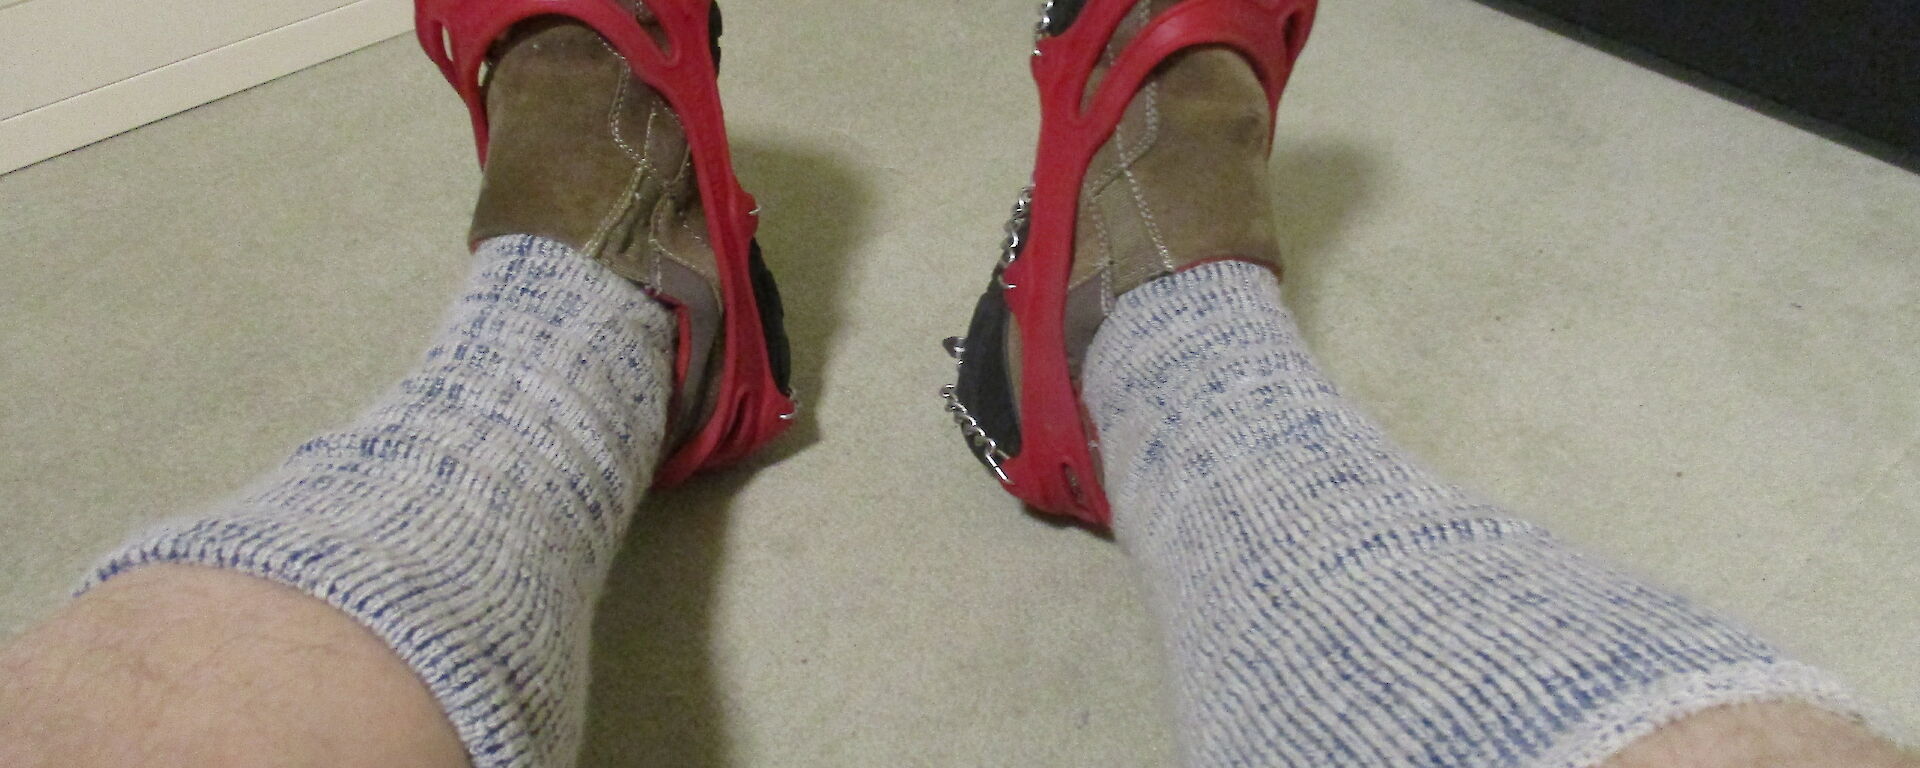 A pair of summer sorrells with spiked chains on sock covered legs